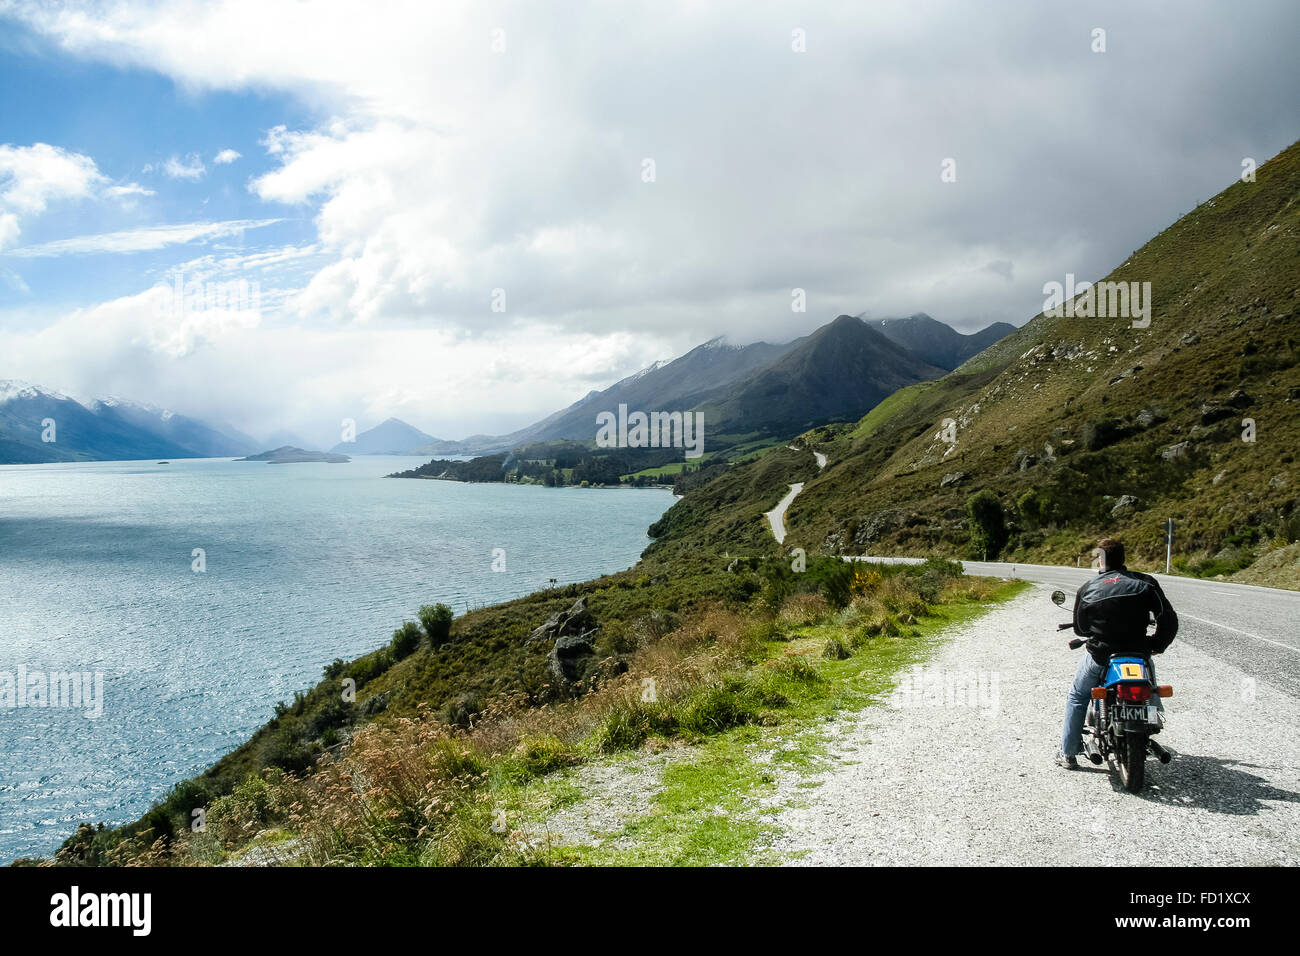 Lake Wakitipu, New Zealand. Motorcycle rider looking at the view on the side of the road. Stock Photo